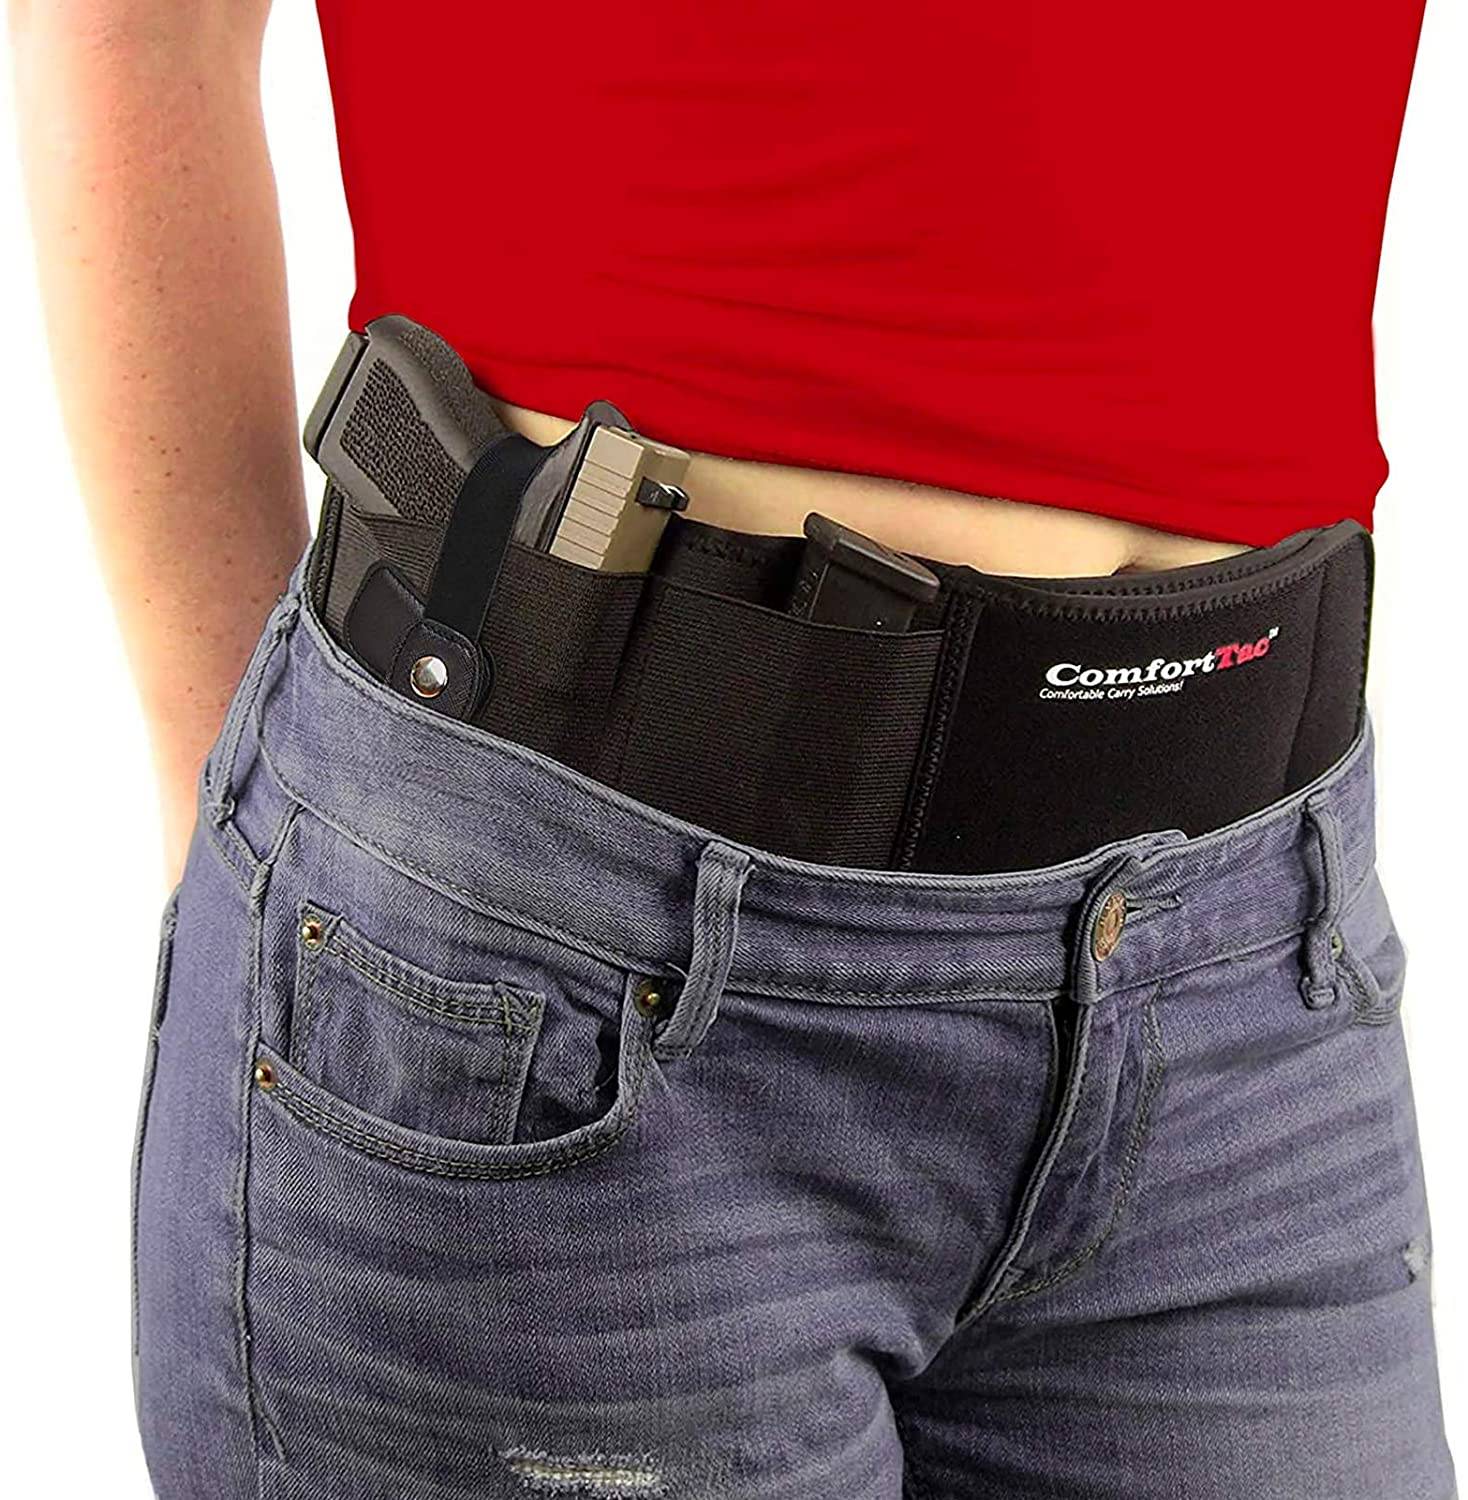 Belly Band gun Holster with Magazine Pouch Concealed Carry for Ruger Beretta 